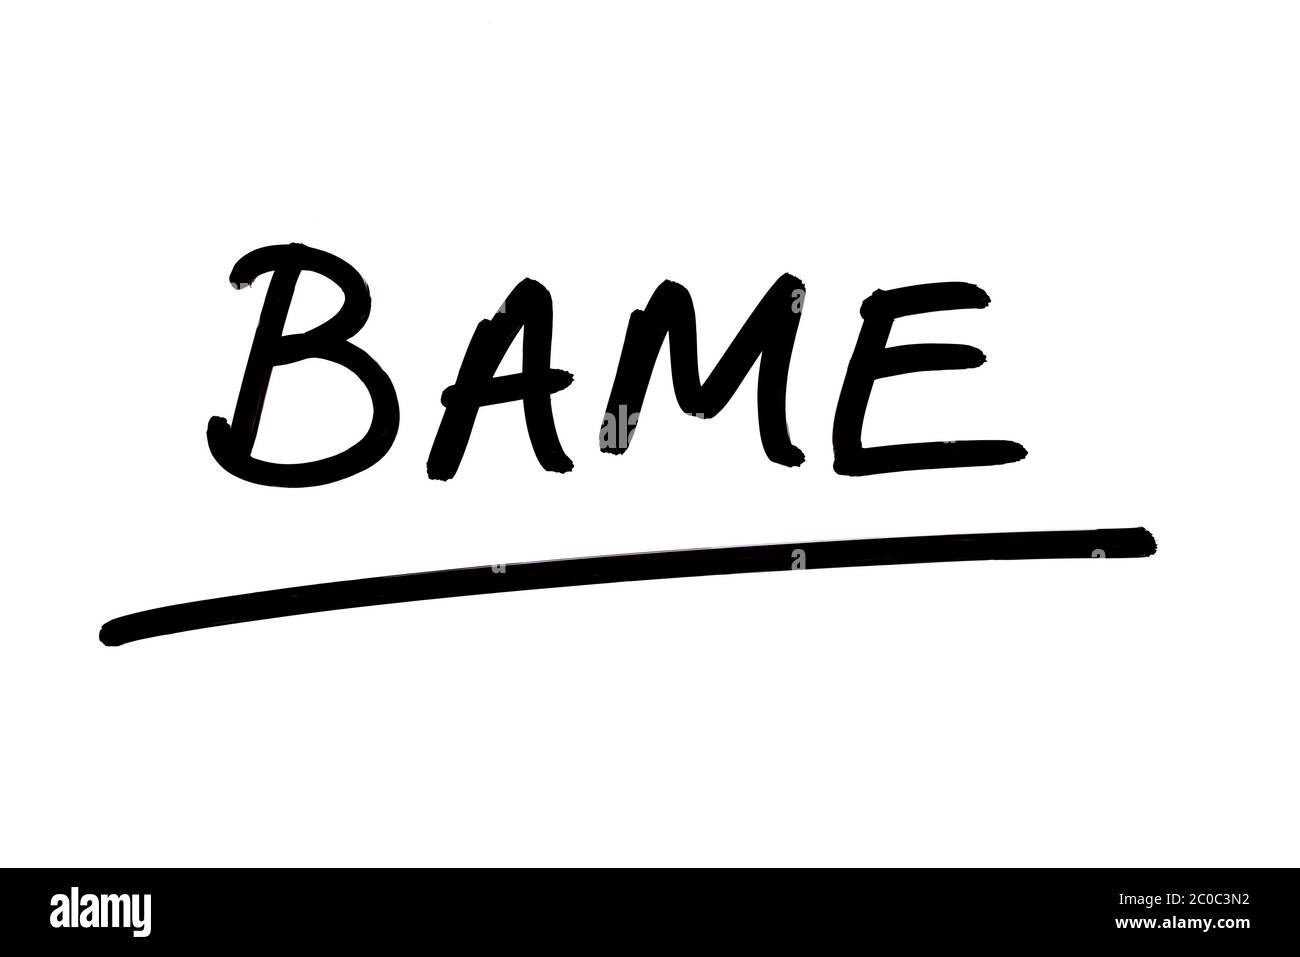 The abbreviation BAME - meaning Black, Asian and Minority Ethnic - handwritten on a white background. Stock Photo